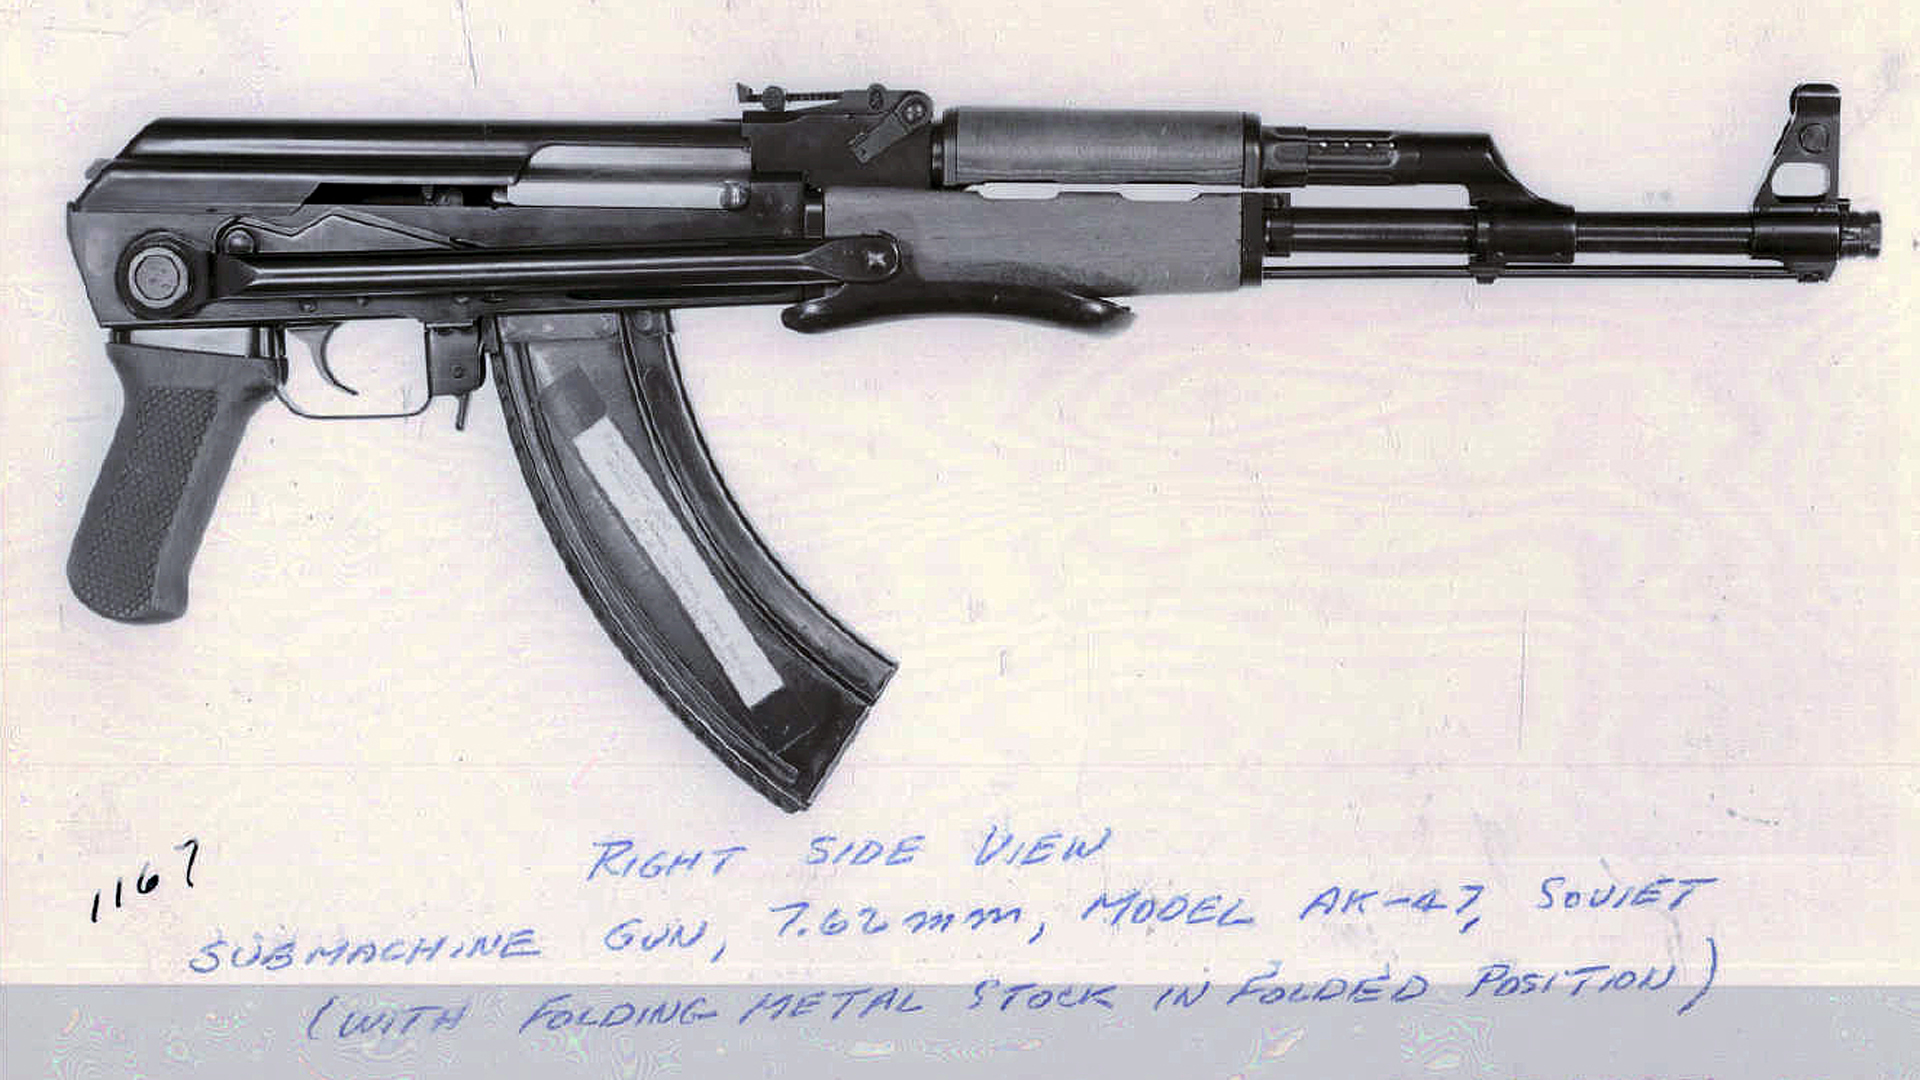 In many circumstances, US Ordnance continued to refer to firearms similar to the StG44 as “submachine guns”—as evidenced in the caption of this AK-47 at Springfield Armory during 1961.  Springfield Armory